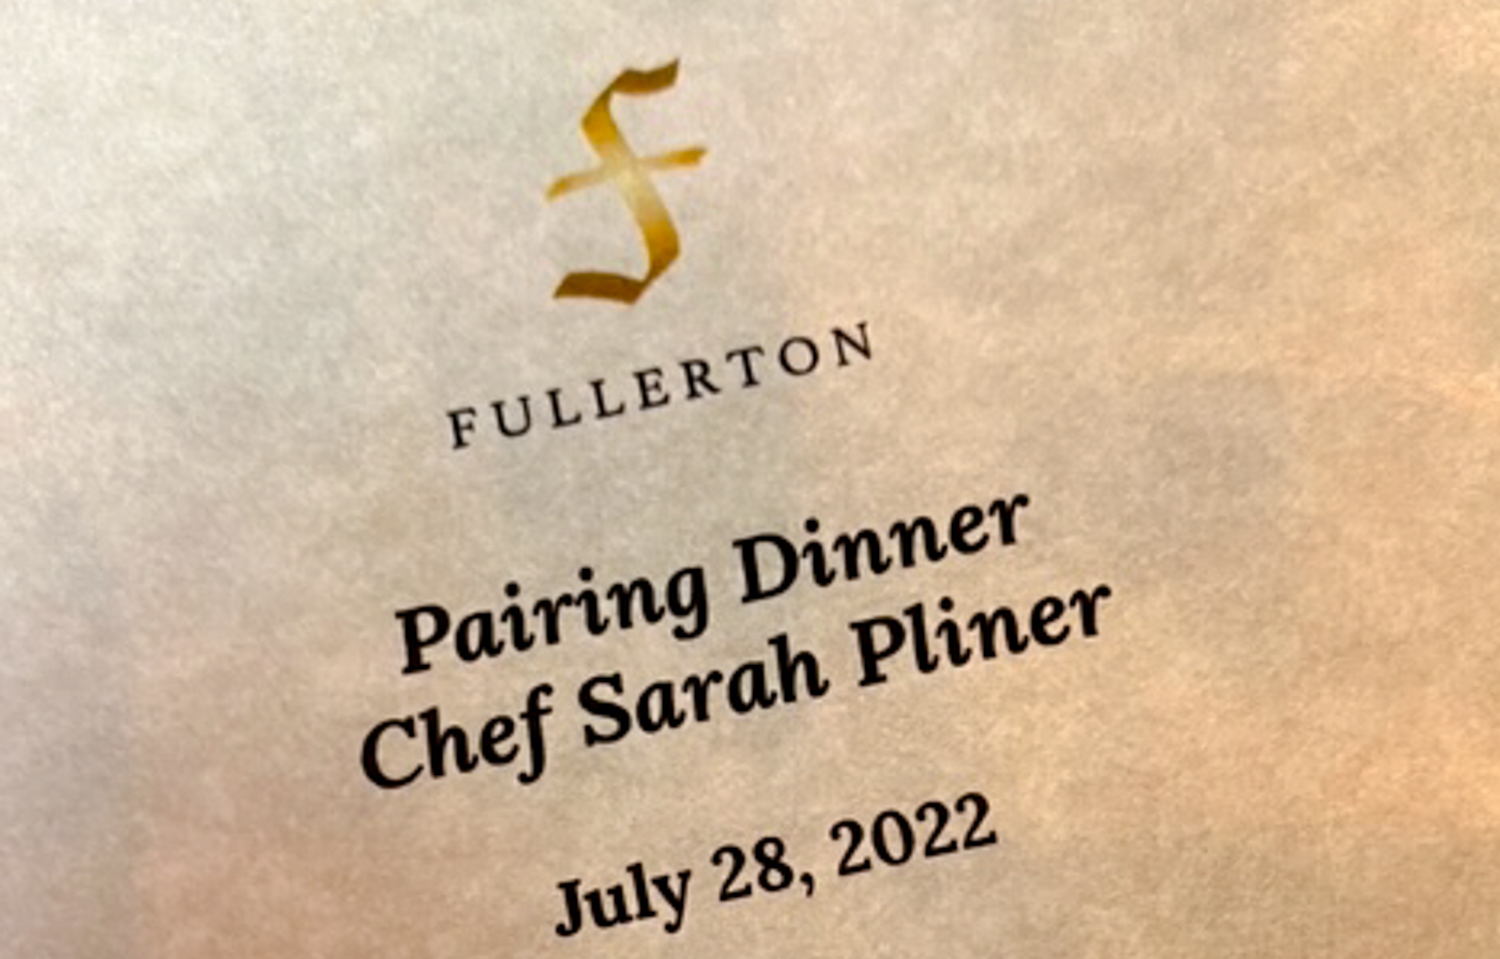 An Exquisite Symphony of Flavors ~ Wine Pairing Dinners Featuring Chef Sarah Pliner & Fullerton Wines